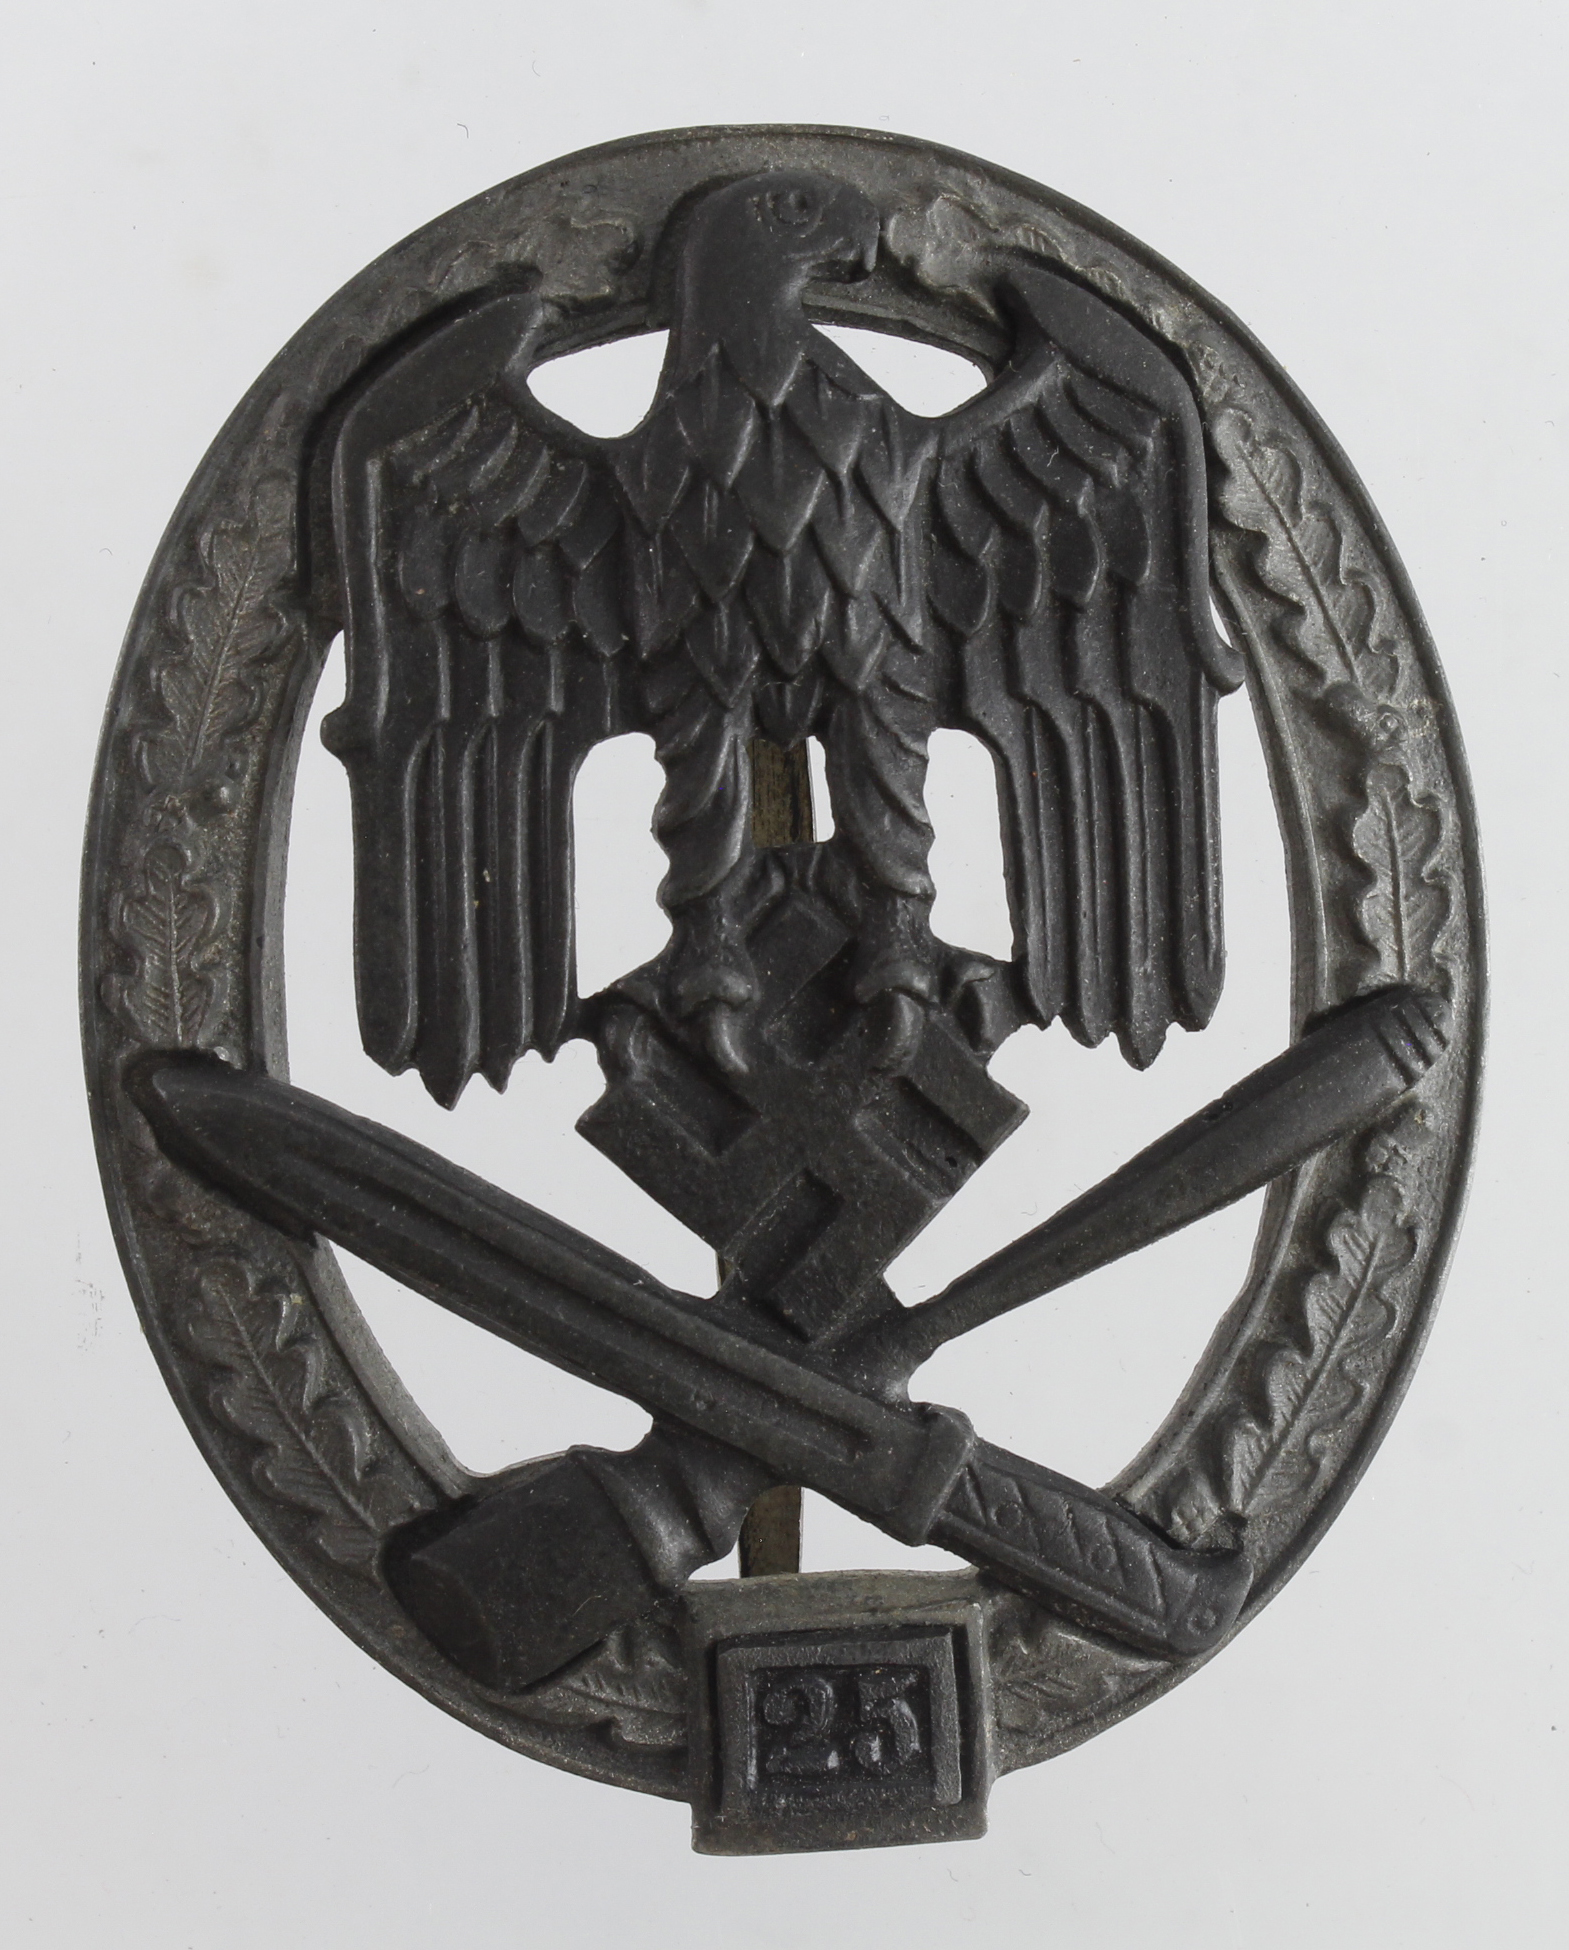 German from a one owner collection a Wehrmacht war badge General Assault badge "25" by "RK".